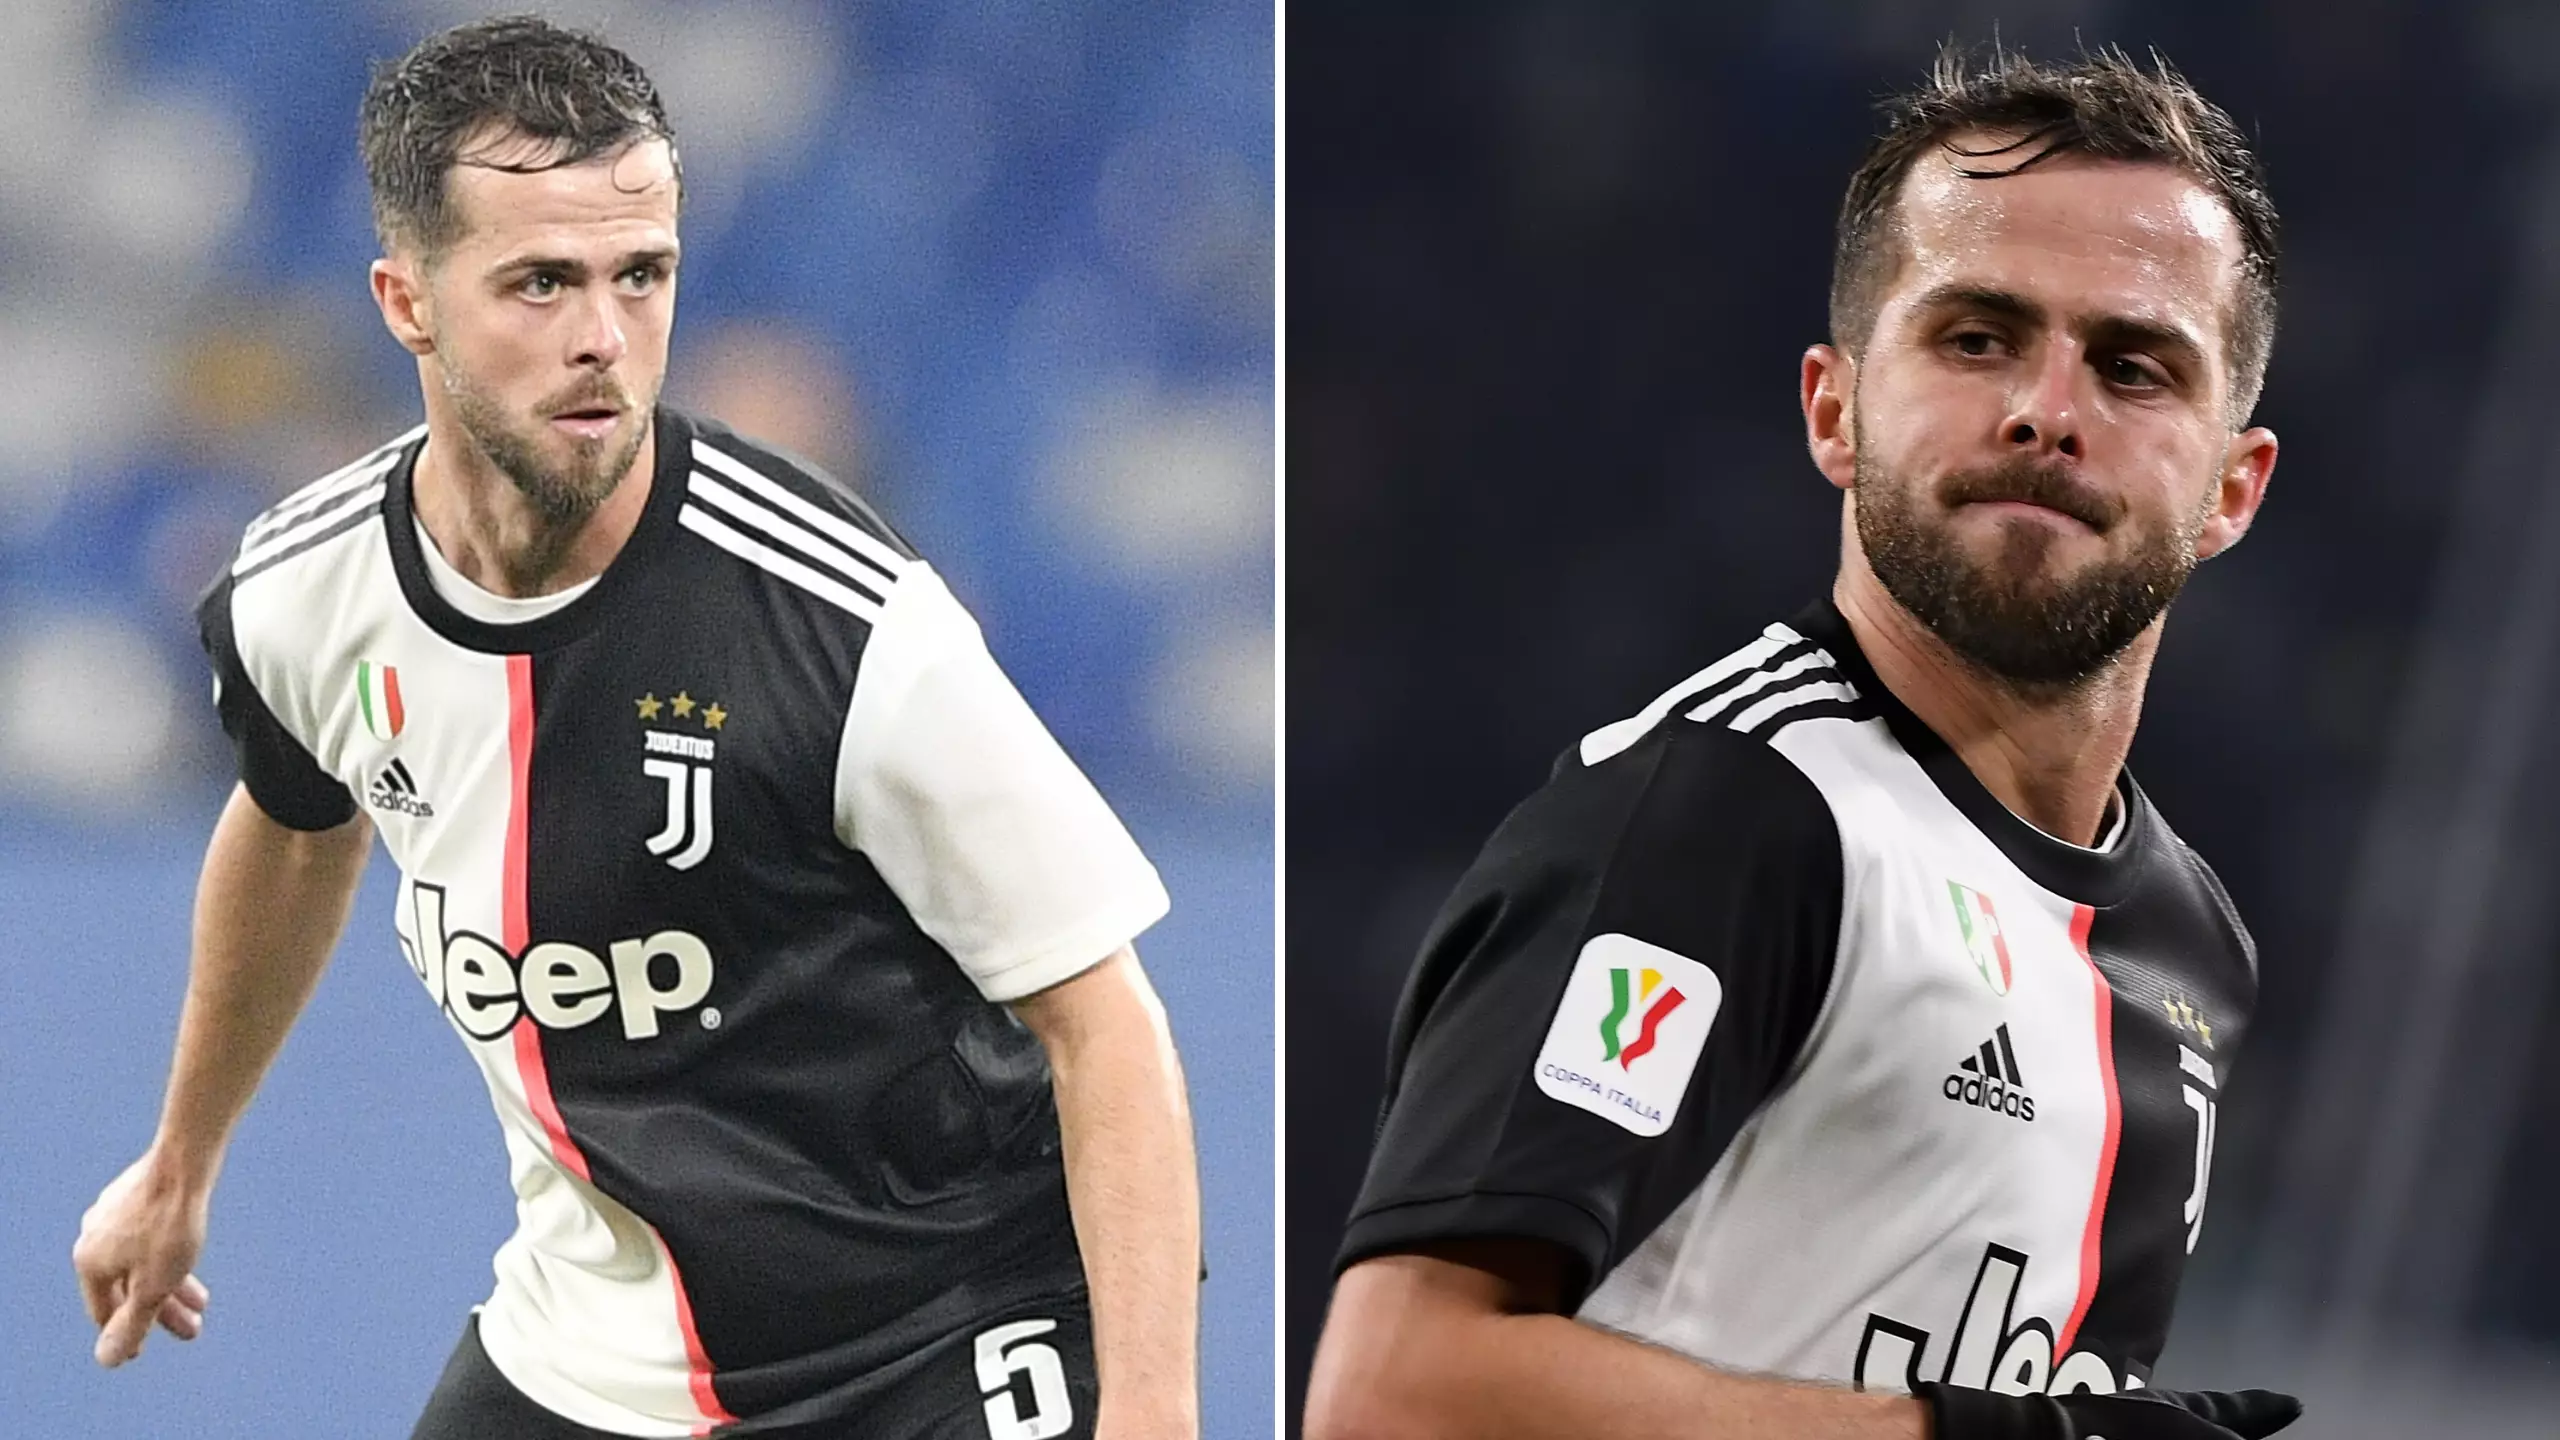 Miralem Pjanic 'Rejects' Two Huge European Clubs For Barcelona Move